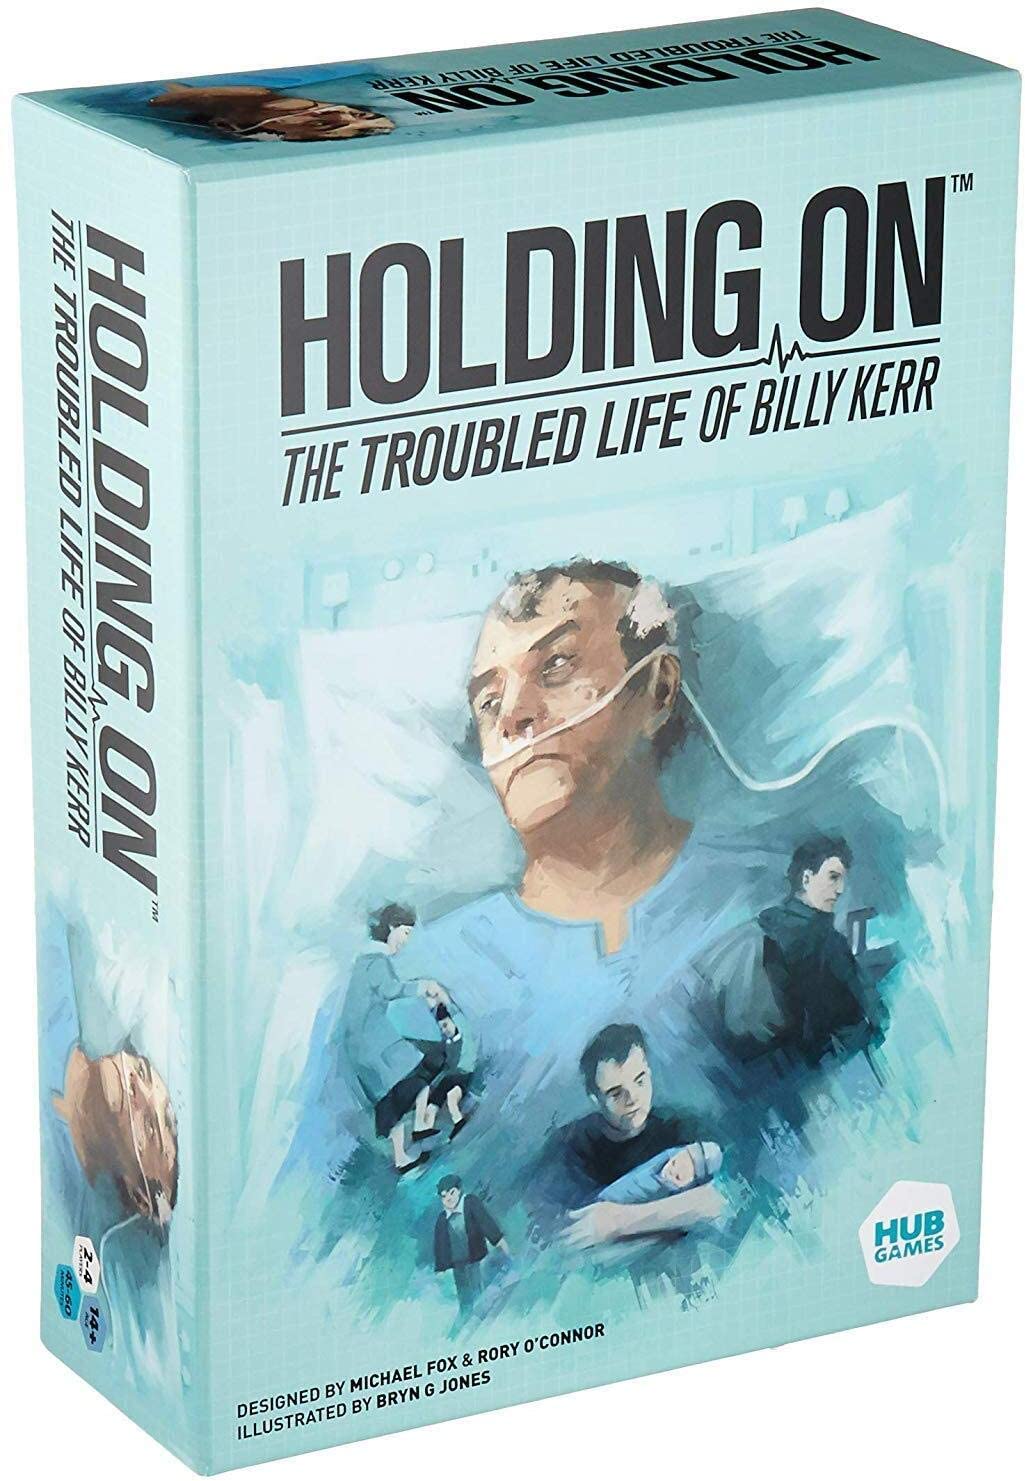 Holding On The Troubled Life of Billy Kerr